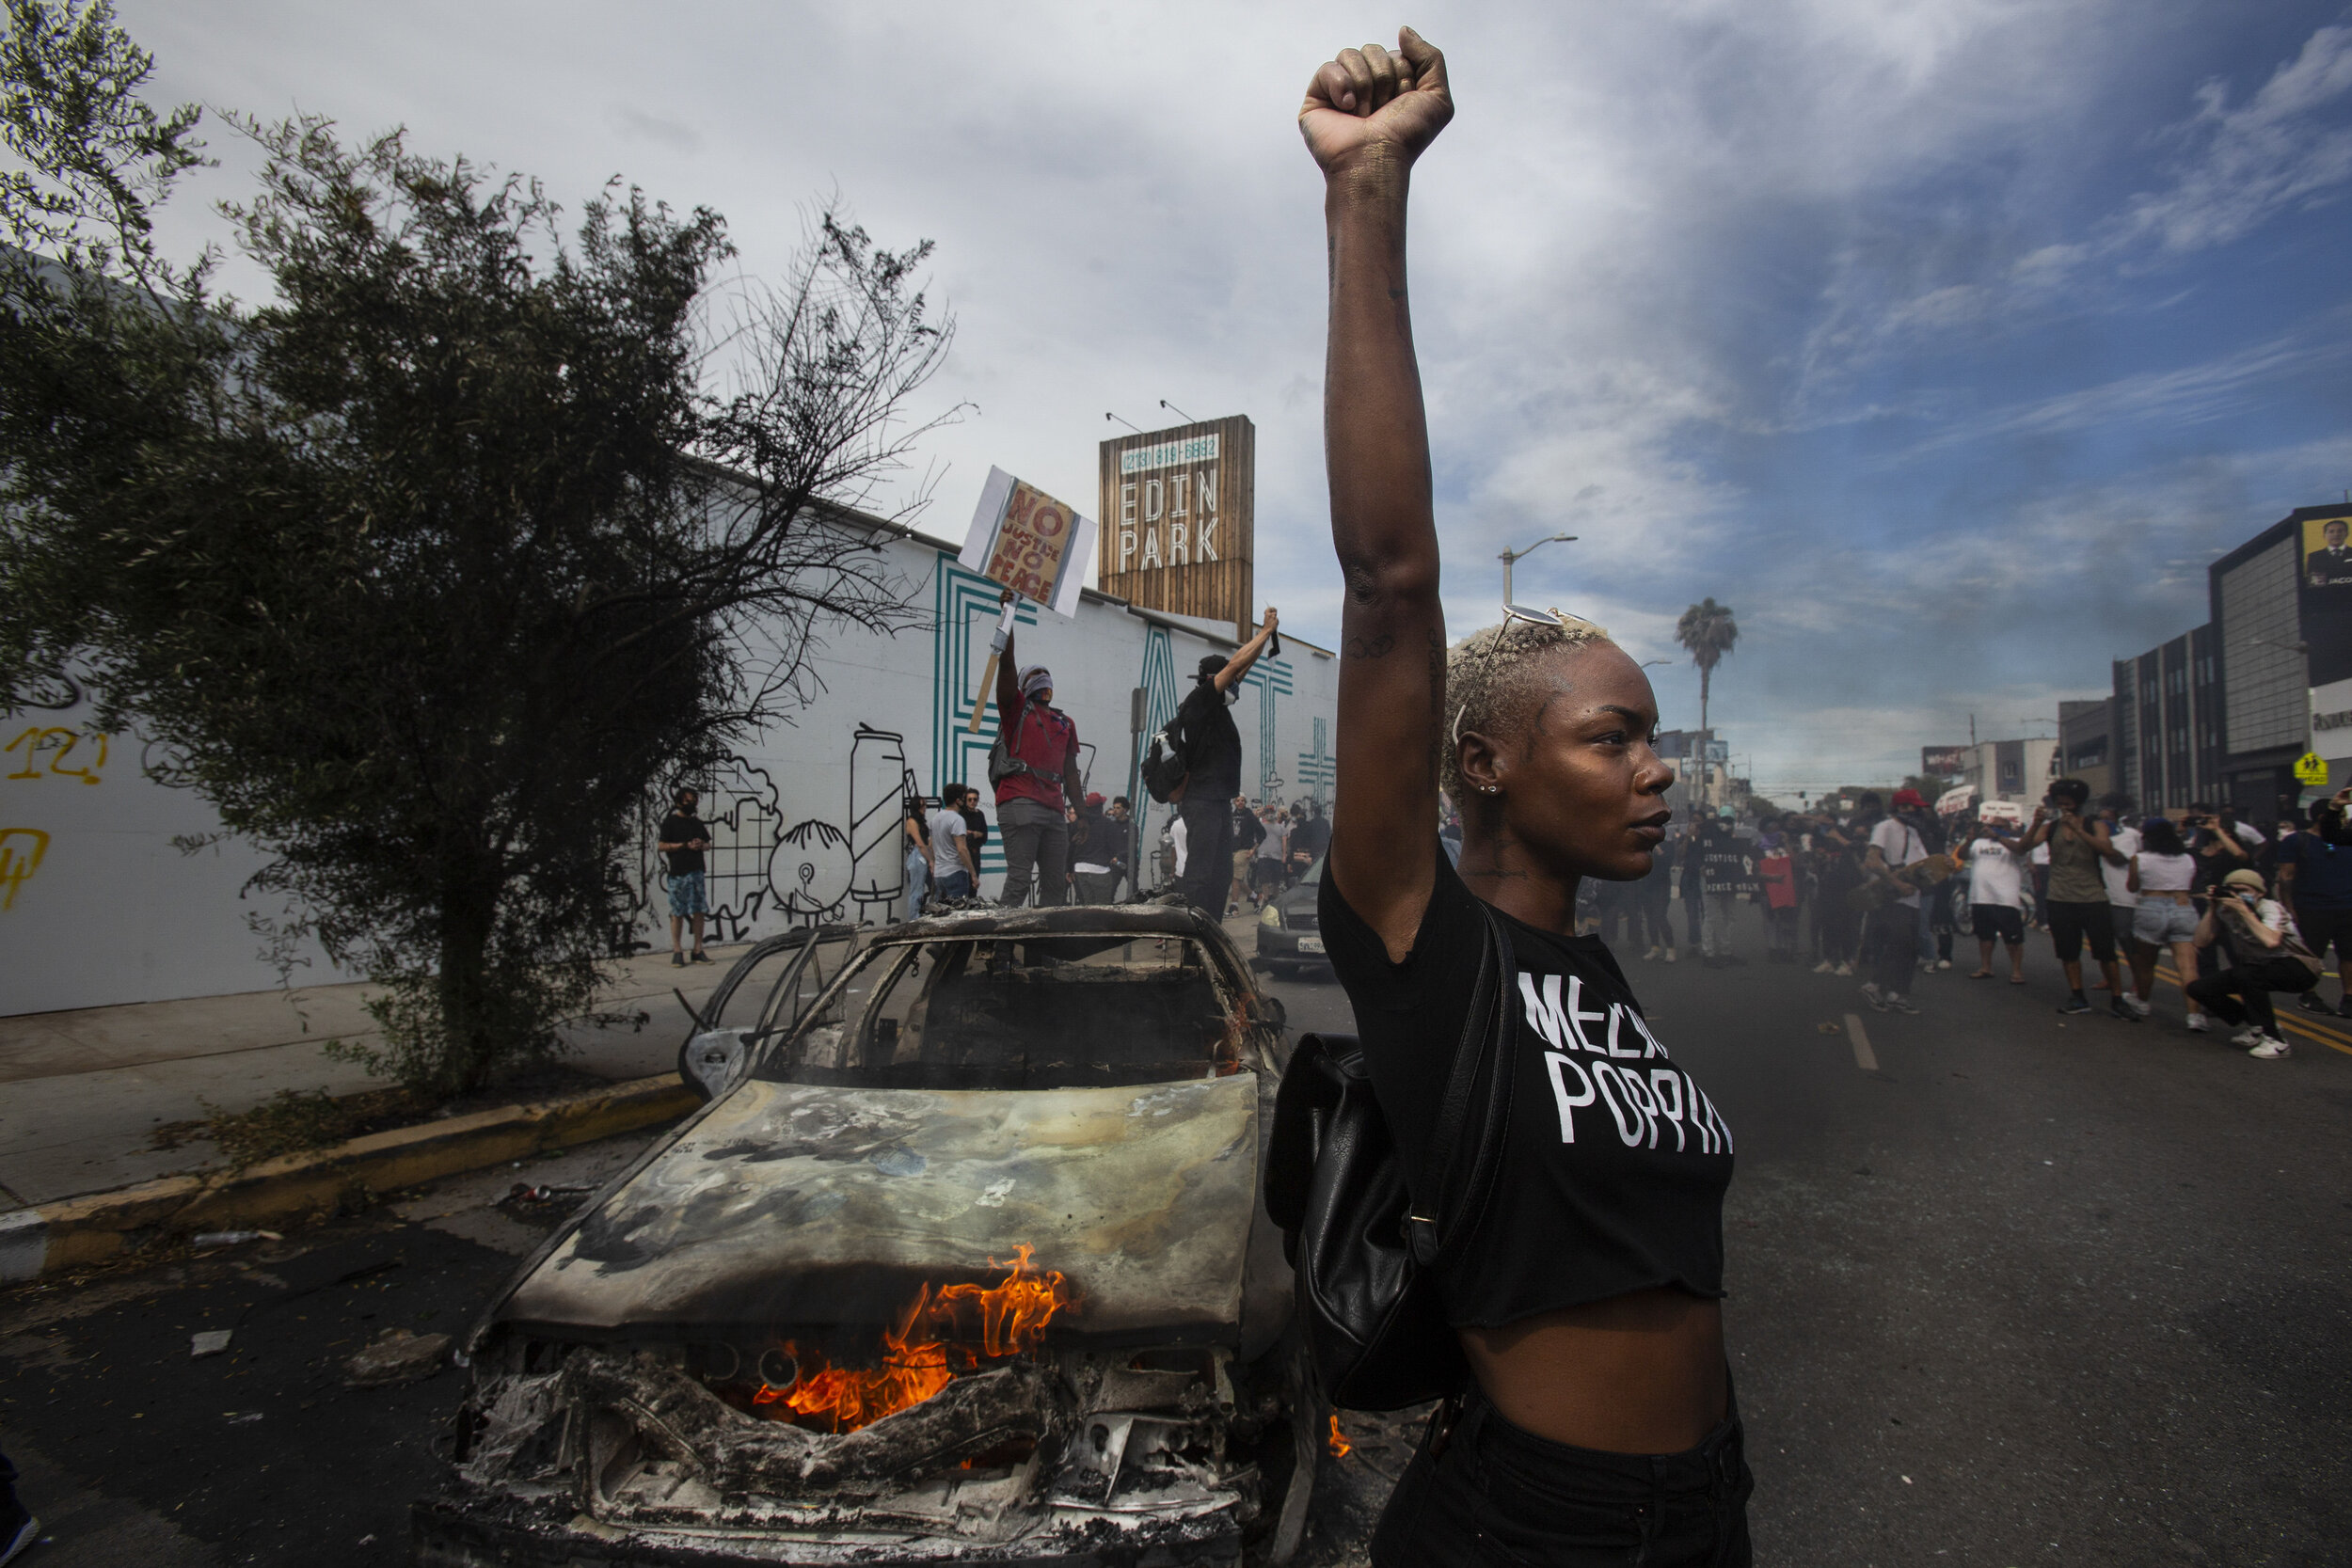  A protester raises her fist in the air next to a burning police vehicle in Los Angeles, May 30, 2020, during a demonstration over the death of George Floyd. (AP Photo/Ringo H.W. Chiu) 